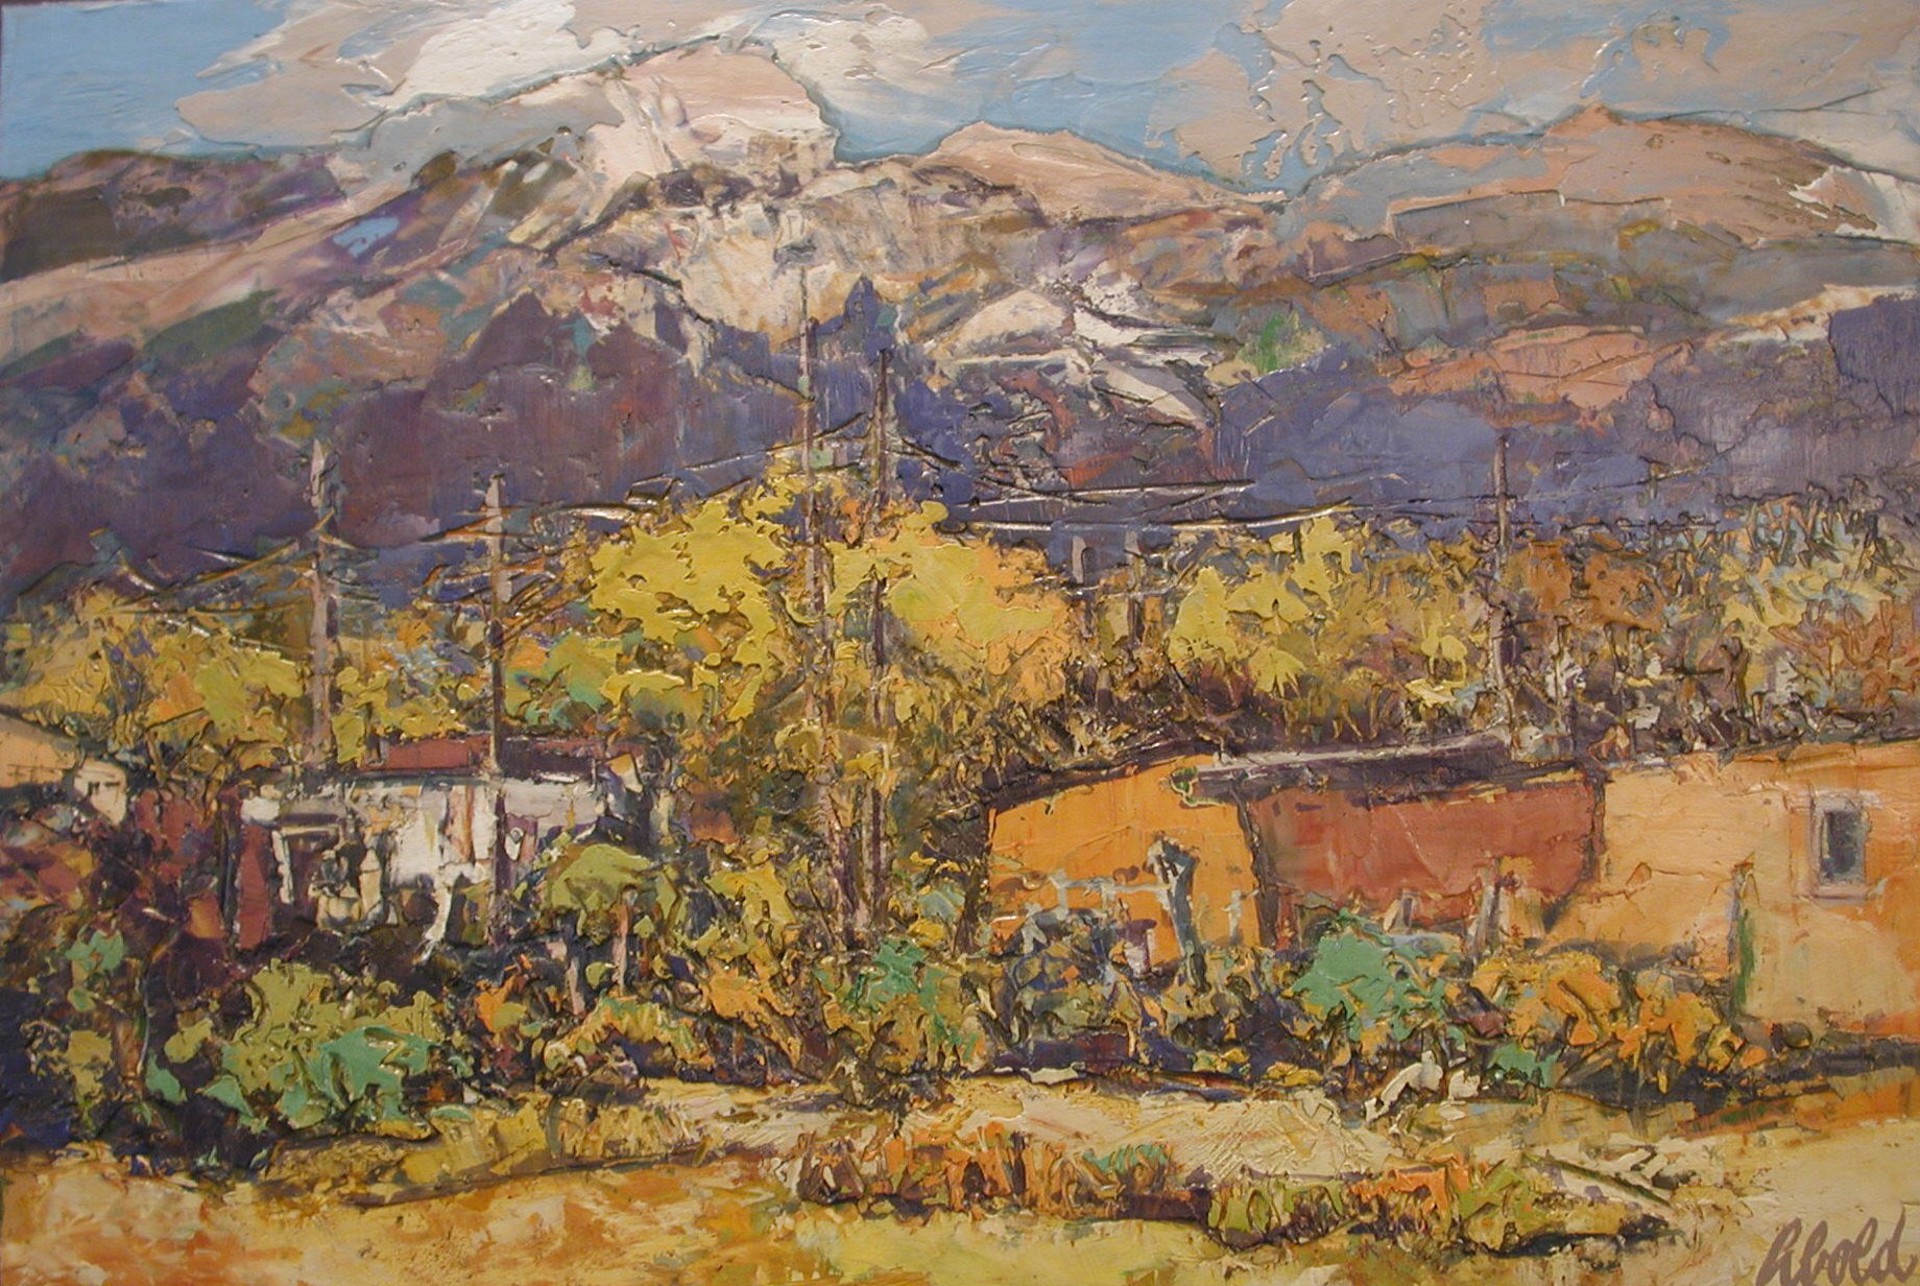 A Stop in Taos by Hans Schiebold